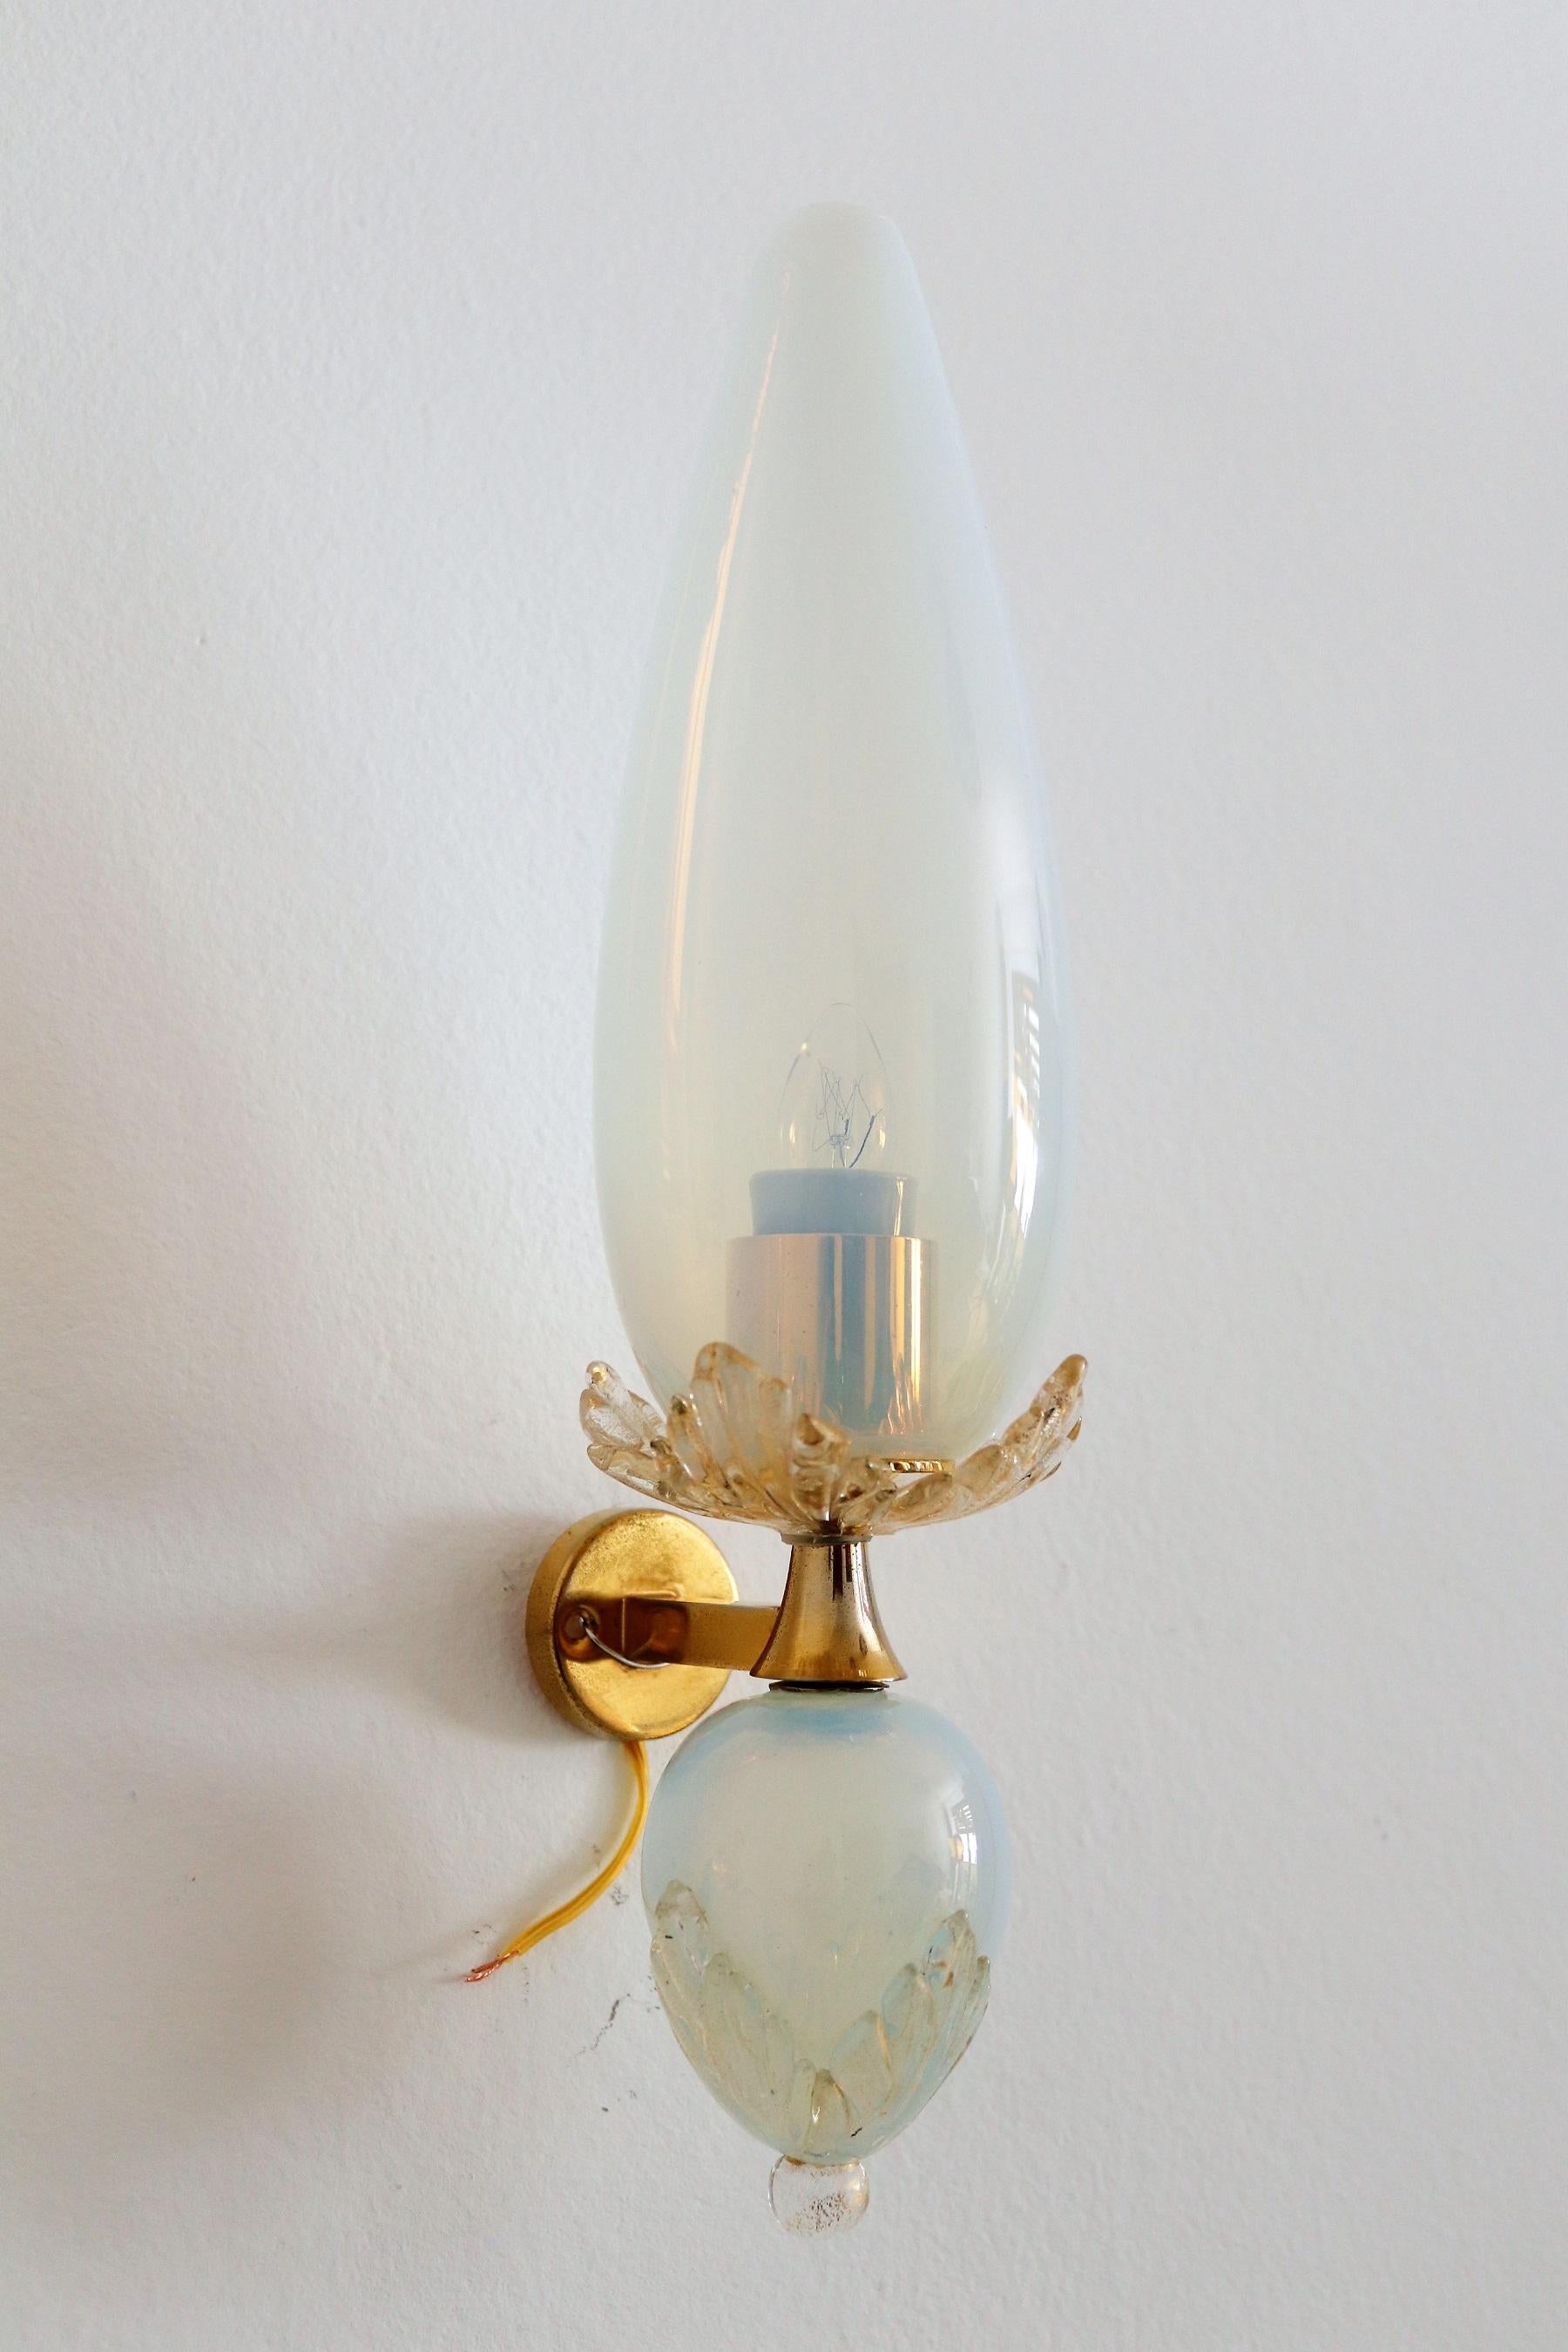 Metal Italian Midcentury Handcrafted Opaline Murano Glass Wall Sconces by Venini 1970s